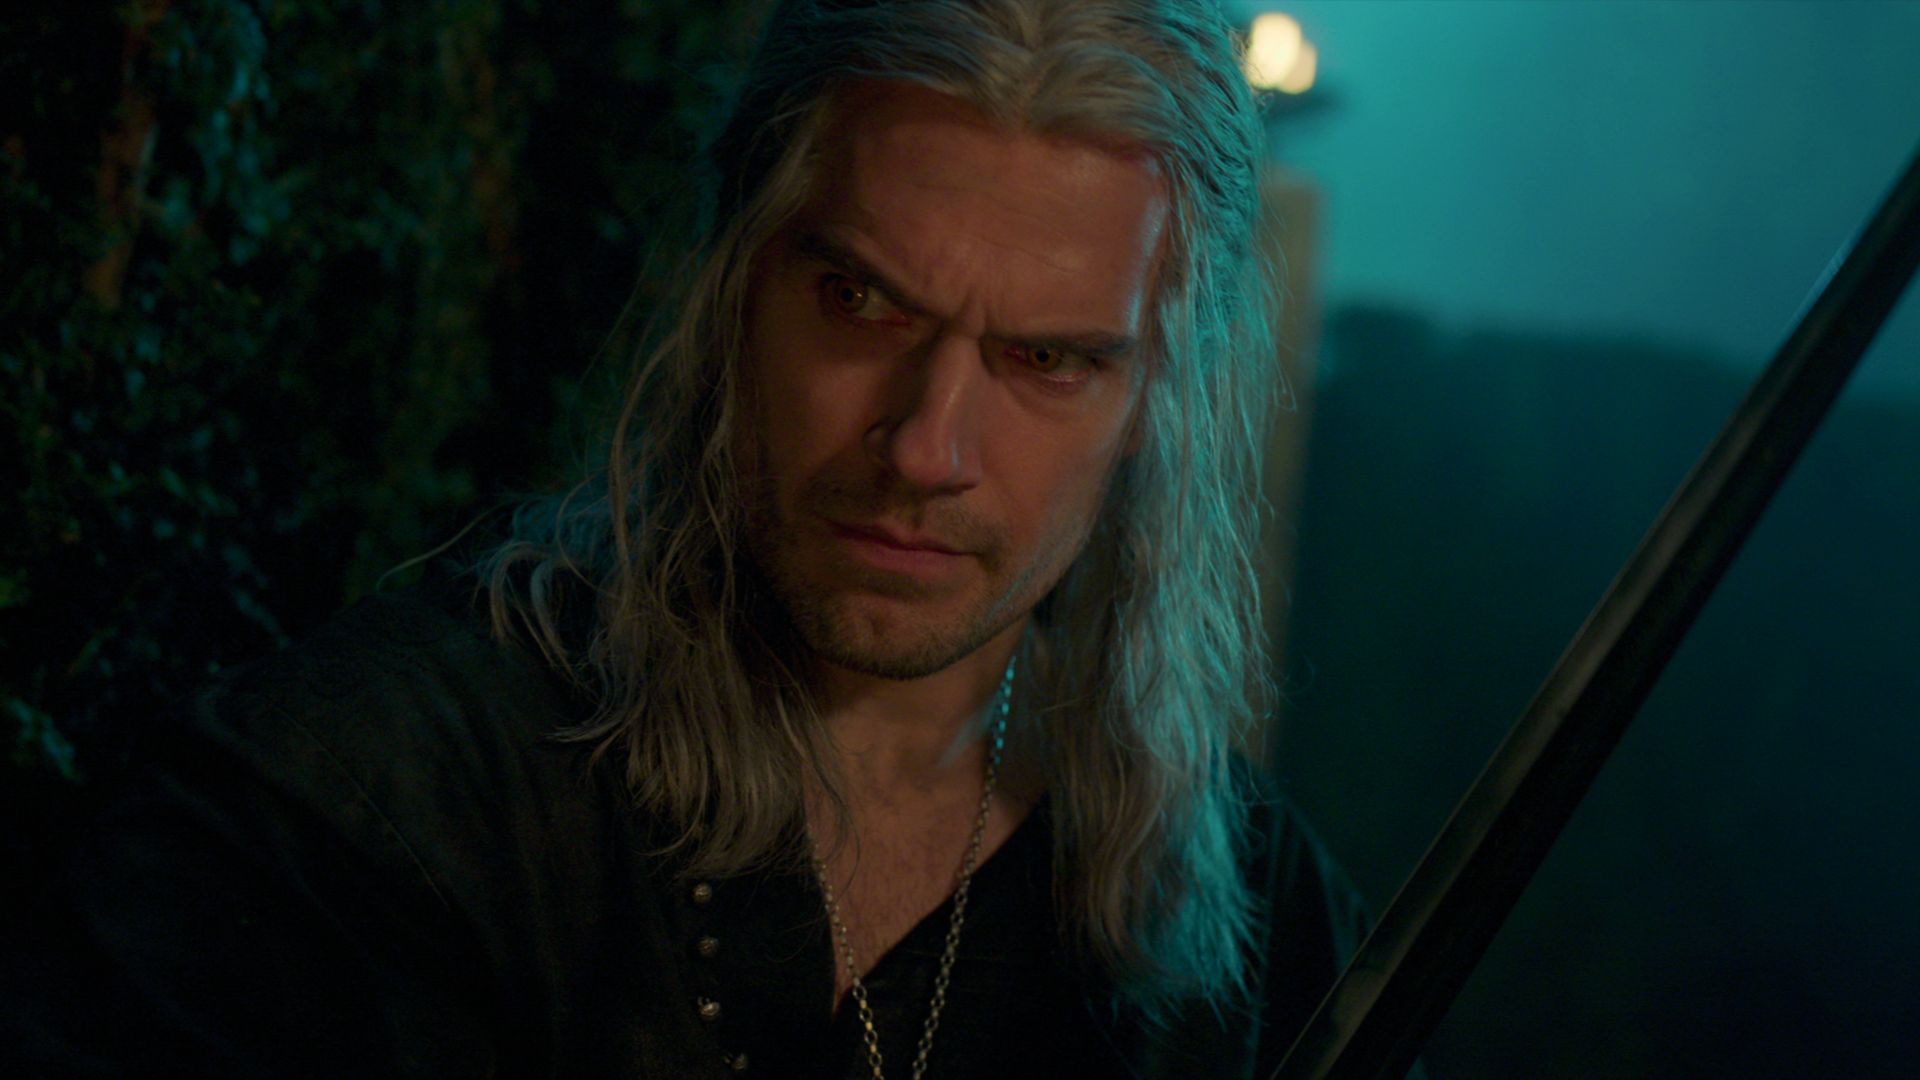 The Witcher Season 4 is Looking at Big Names to Cast Regis - Redanian  Intelligence